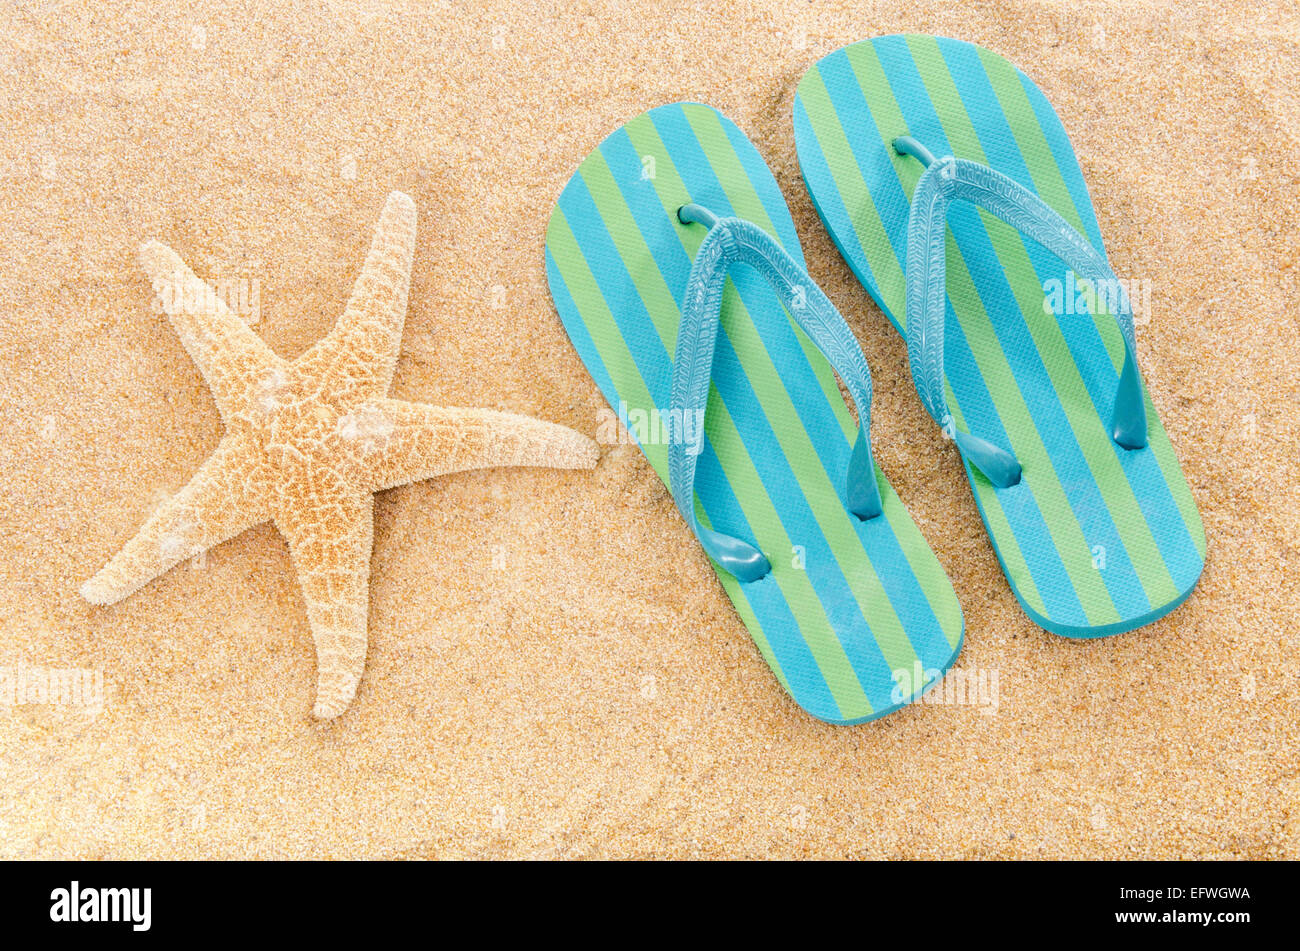 slippers for beach